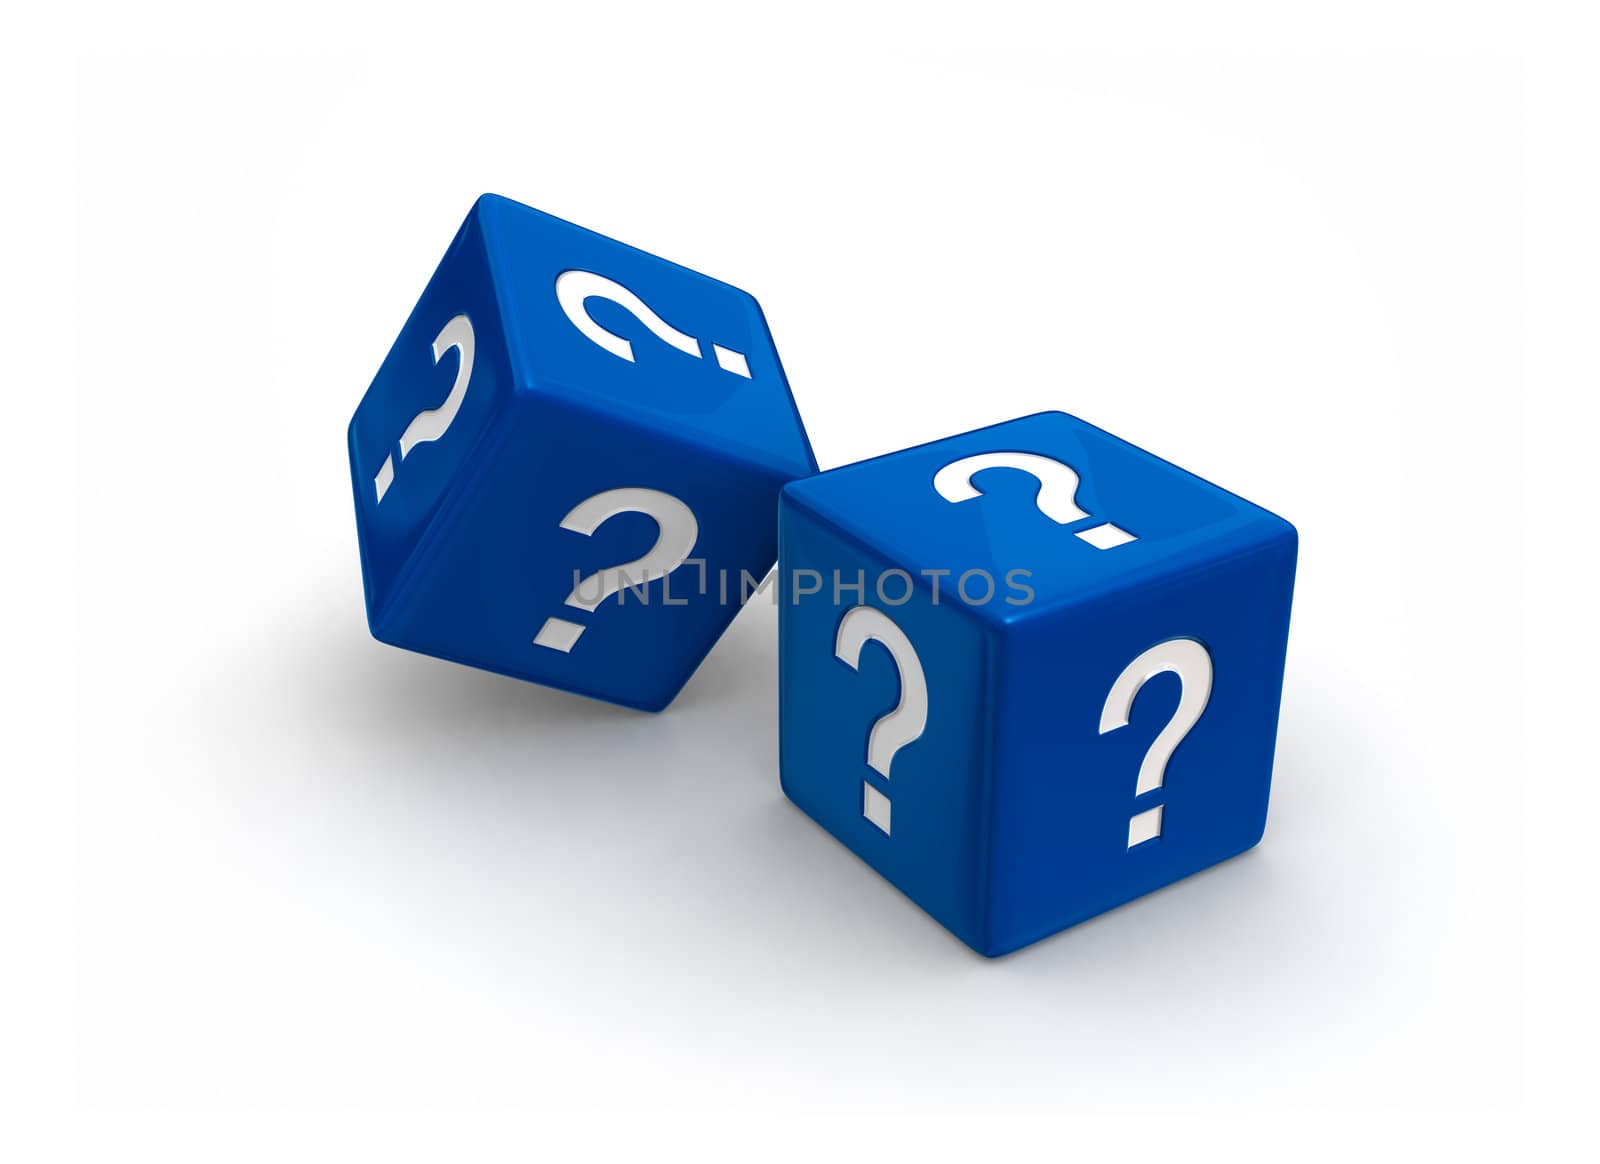 Photo-real illusration of two blue dice engraved question mark symbols on white background.